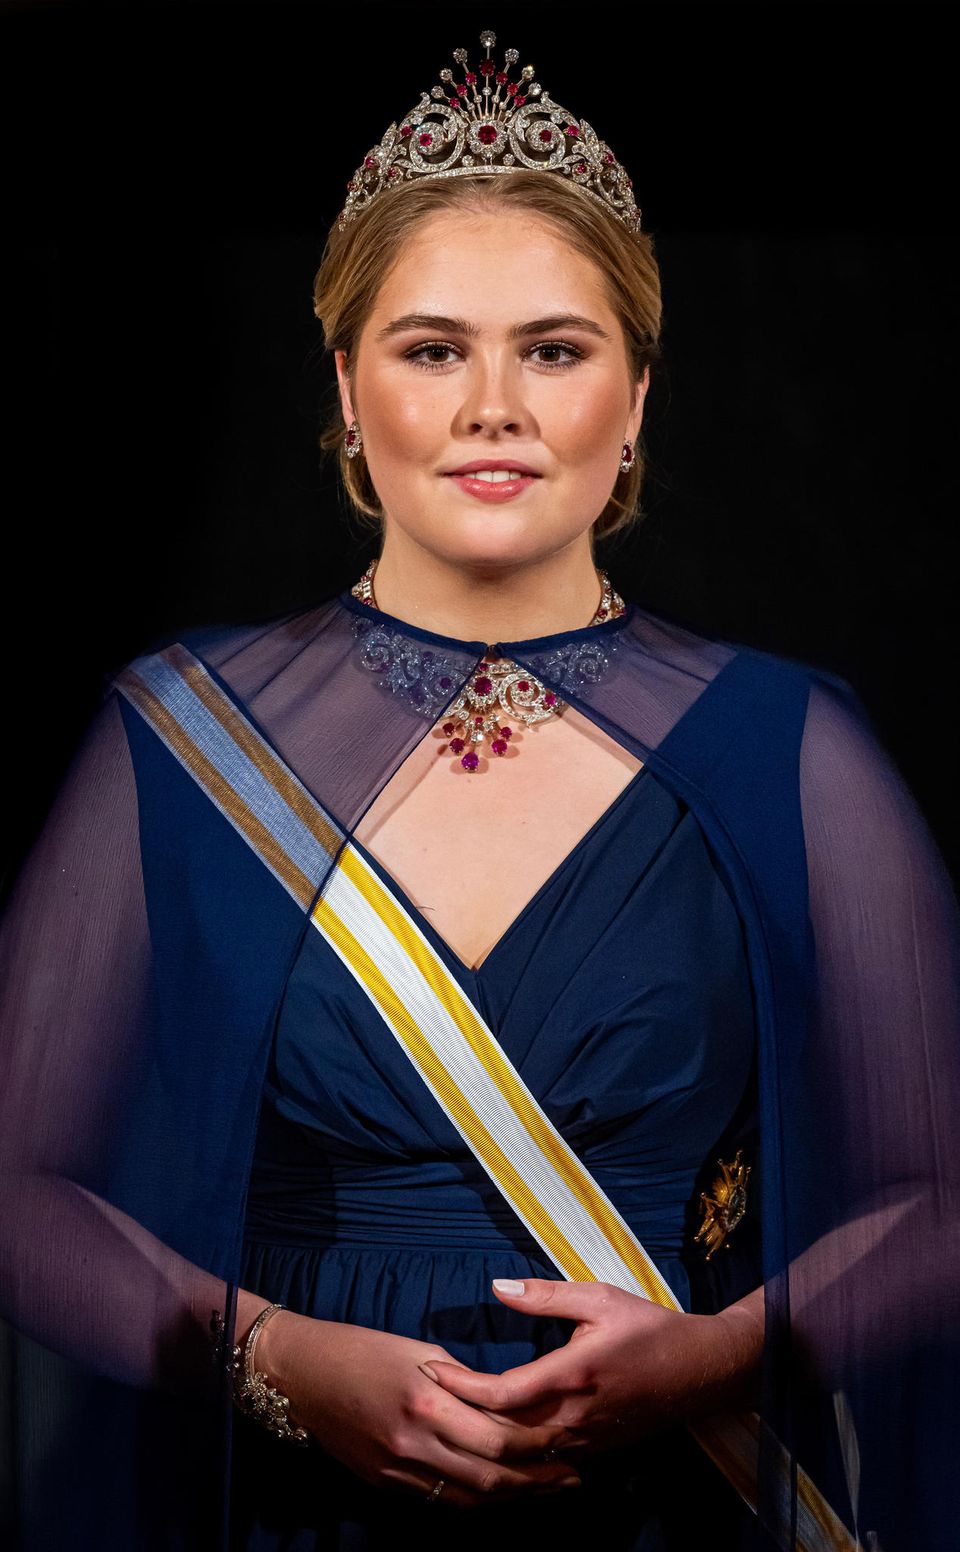 Princess Amalia: She is the star at the state banquet